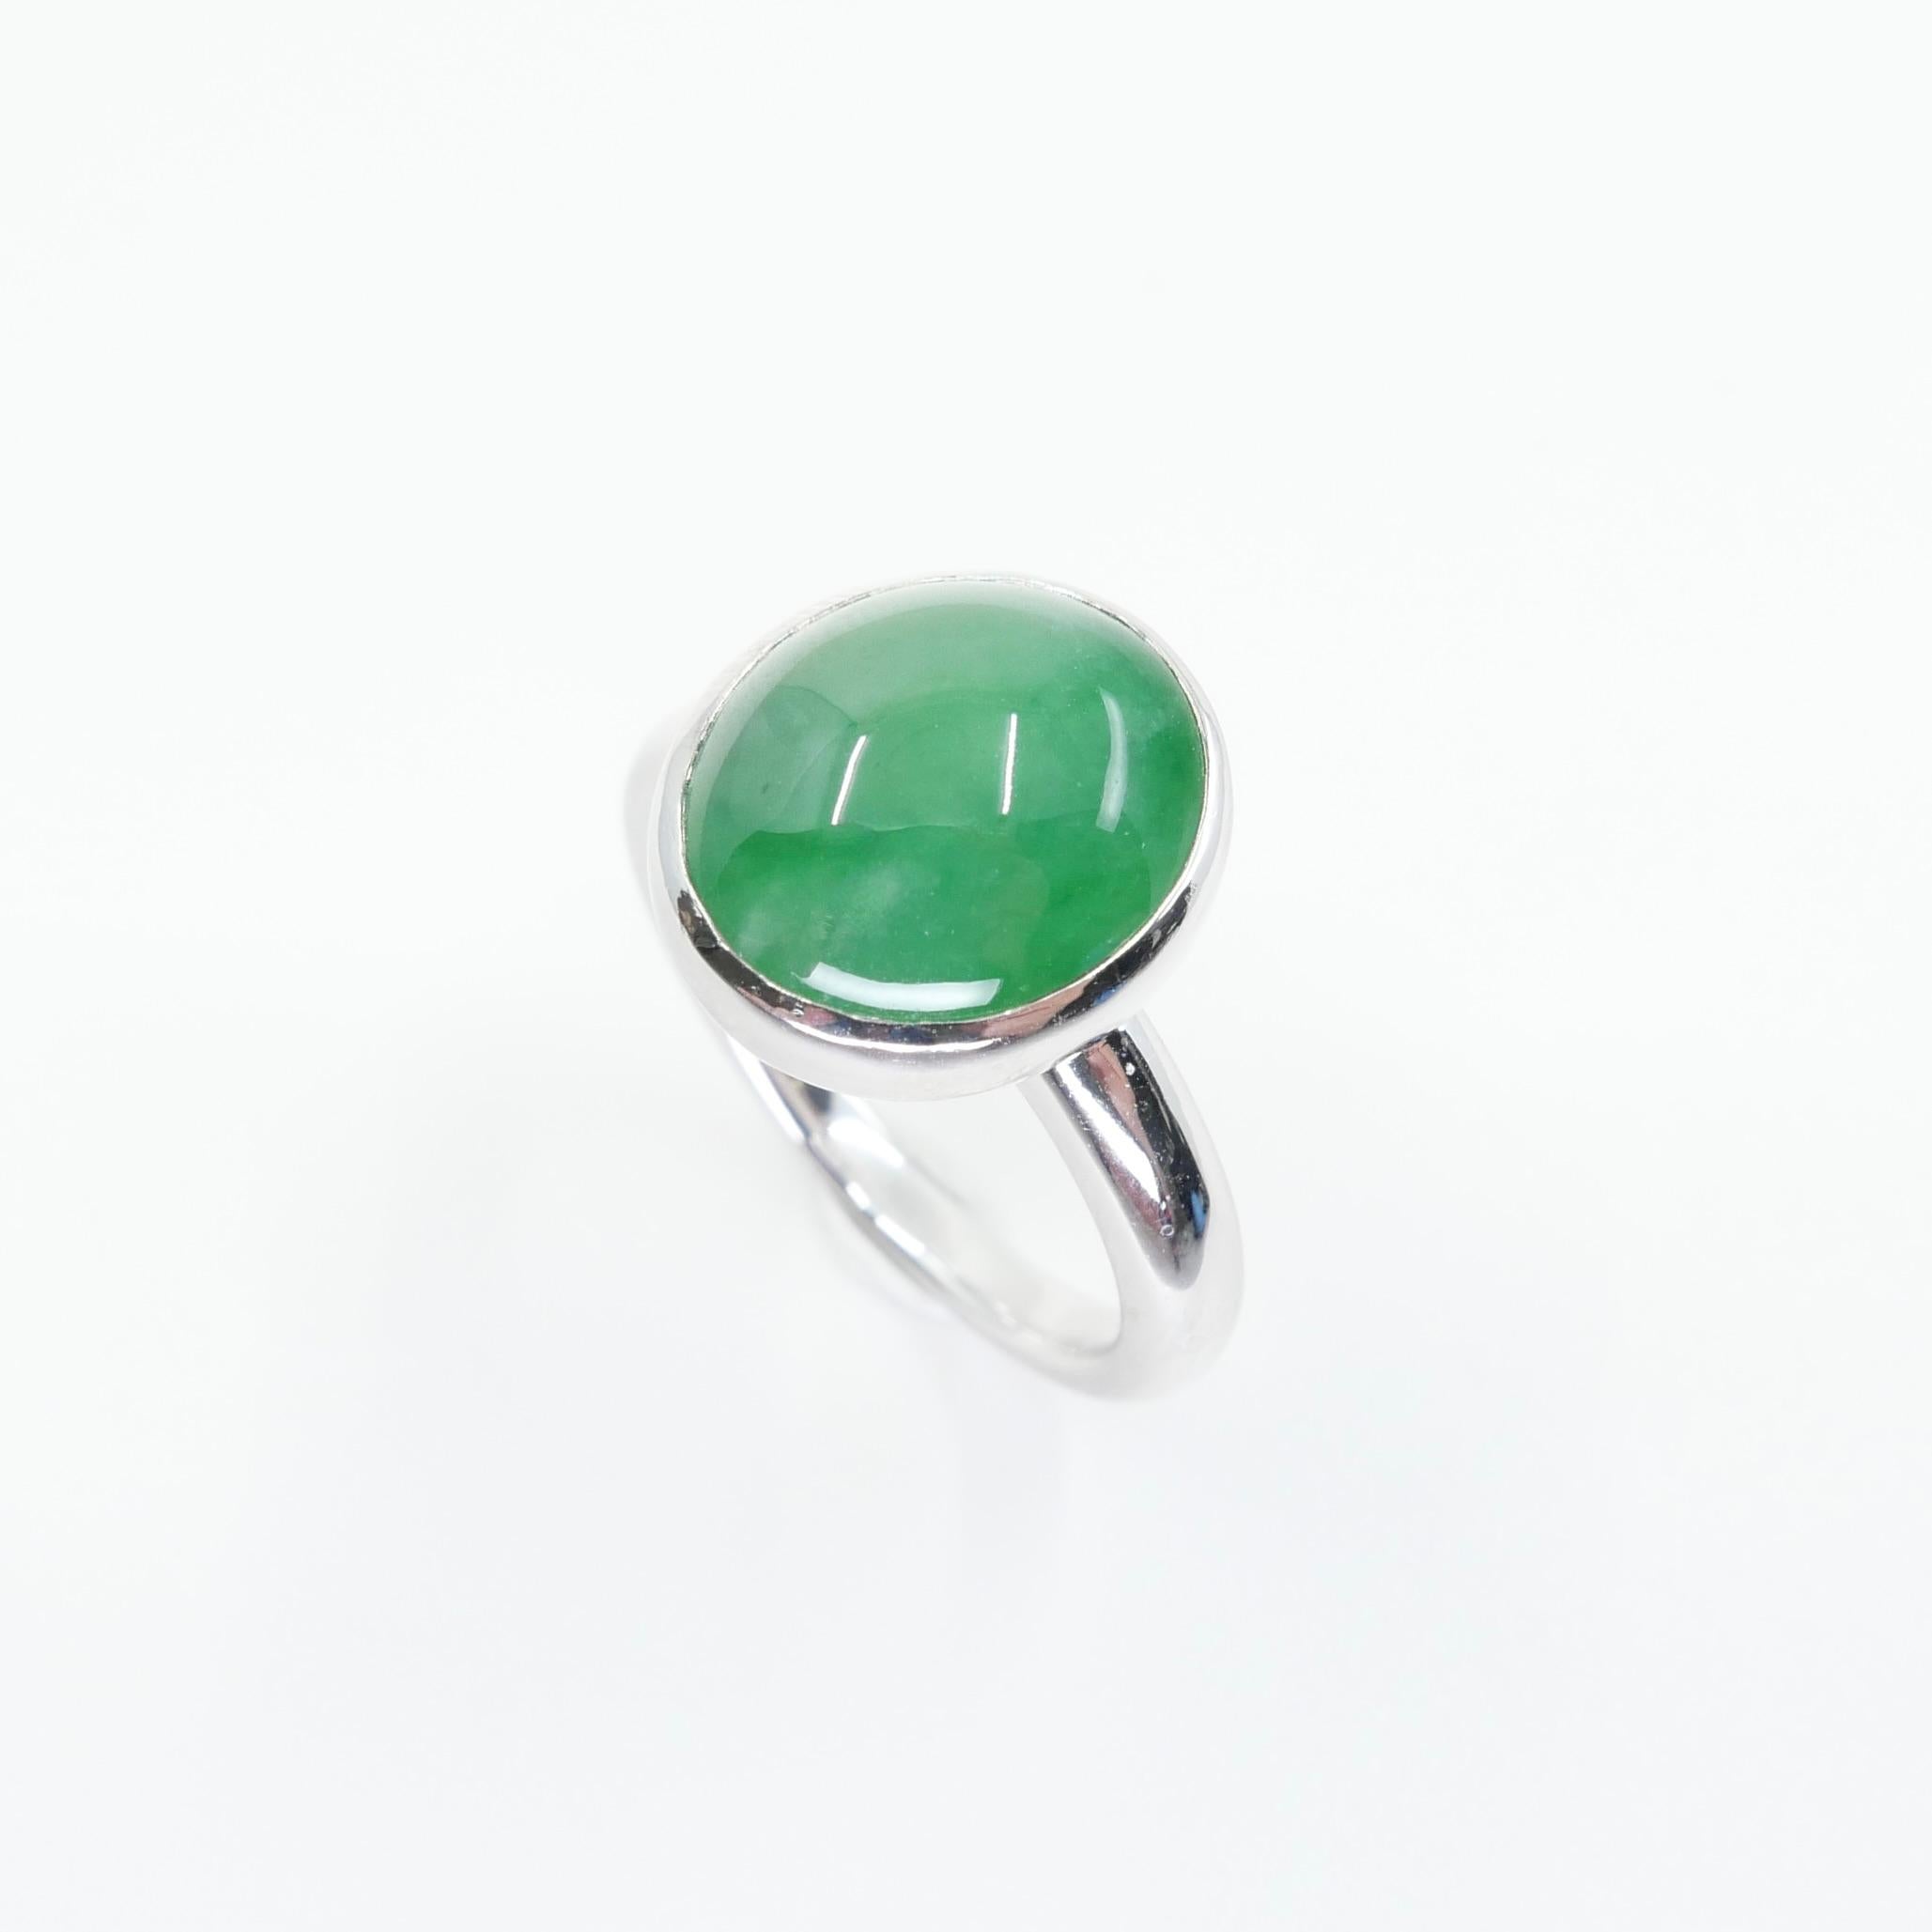 Certified Natural Type A Jadeite Jade Ring, Apple Green Color, Unisex For Sale 1